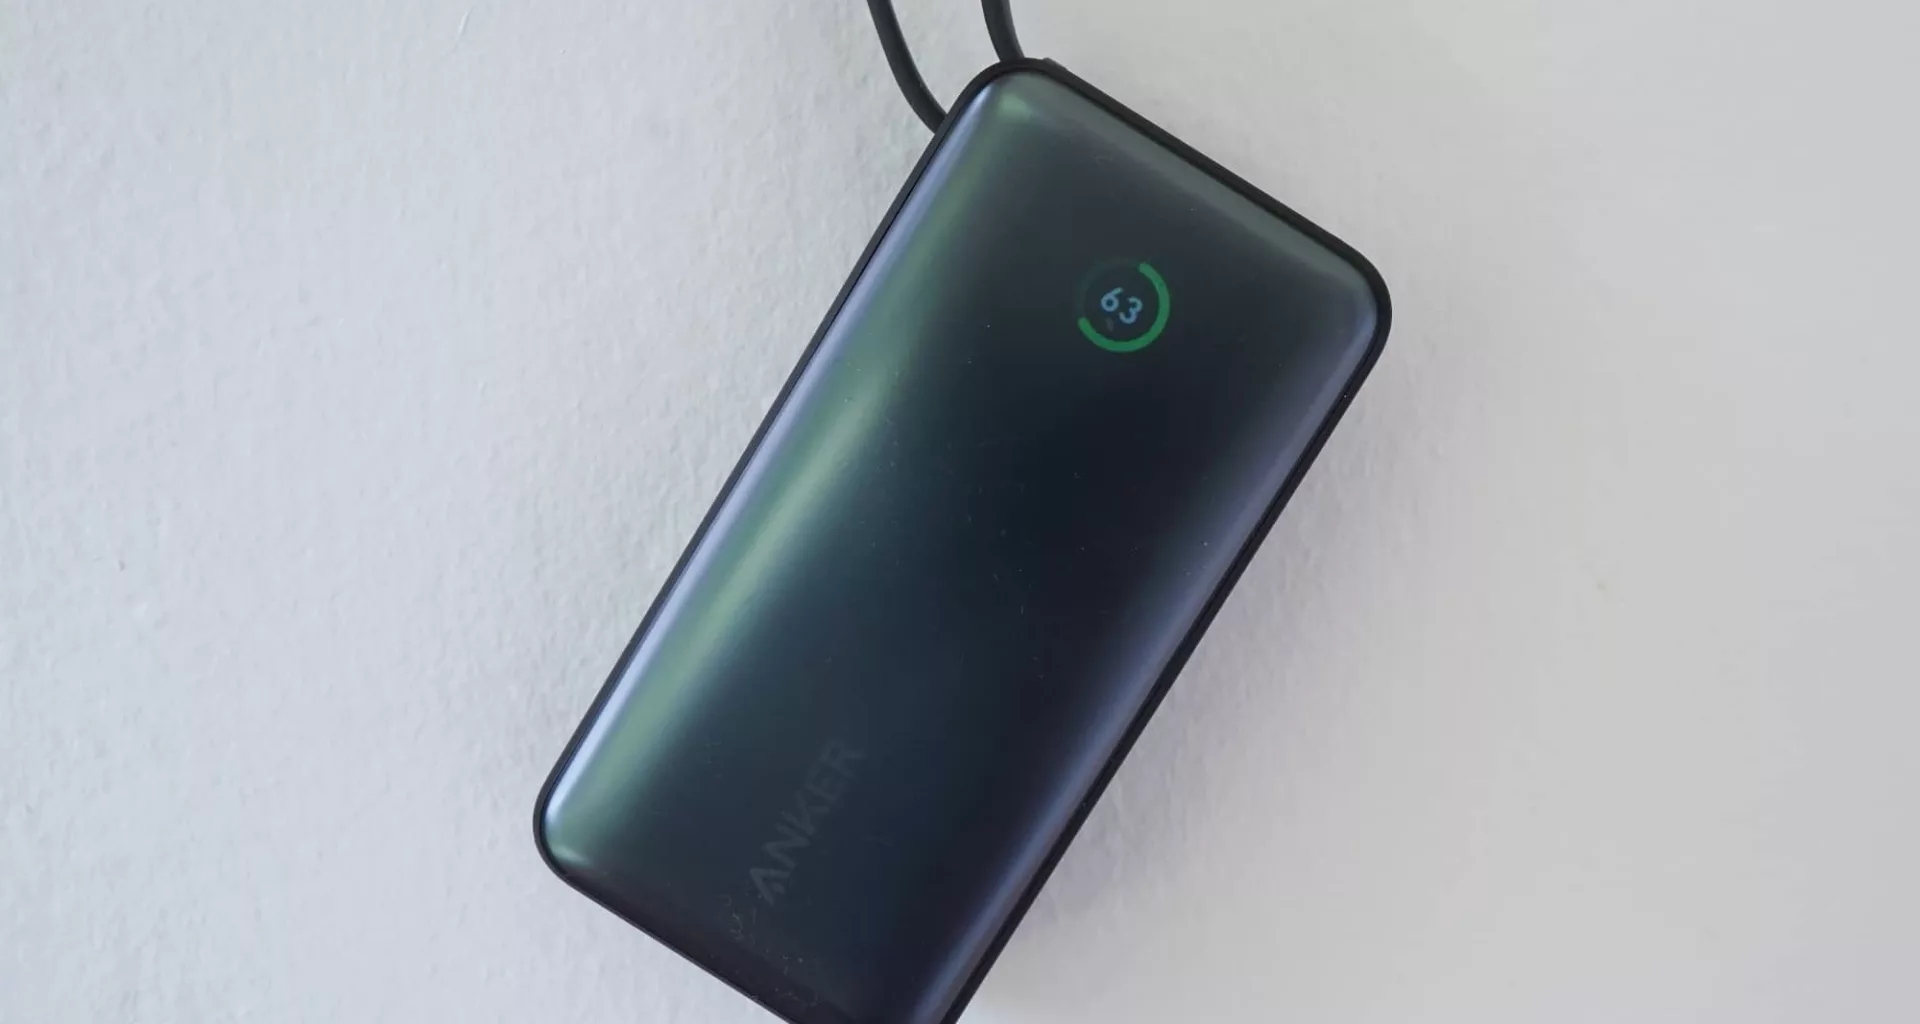 The Nano Power Bank 30W by Anker has a built-in USB-C cable